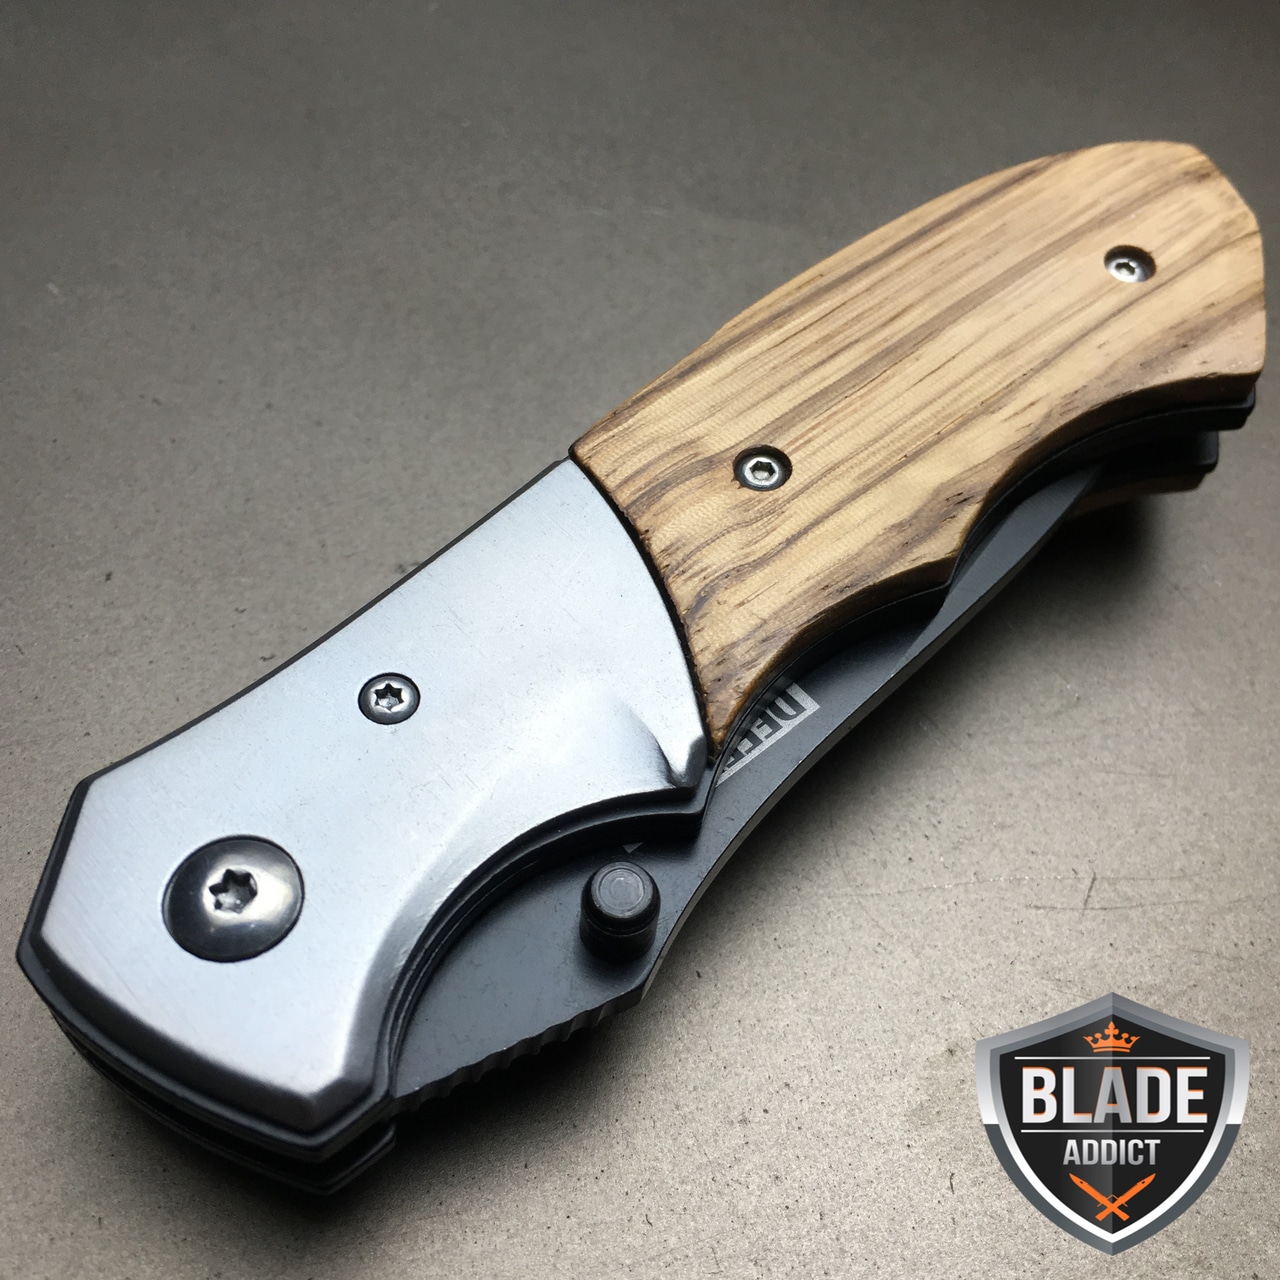 7.5" Classic WOOD Spring Assisted Open Pocket Knife Tactical Combat Survival EDC